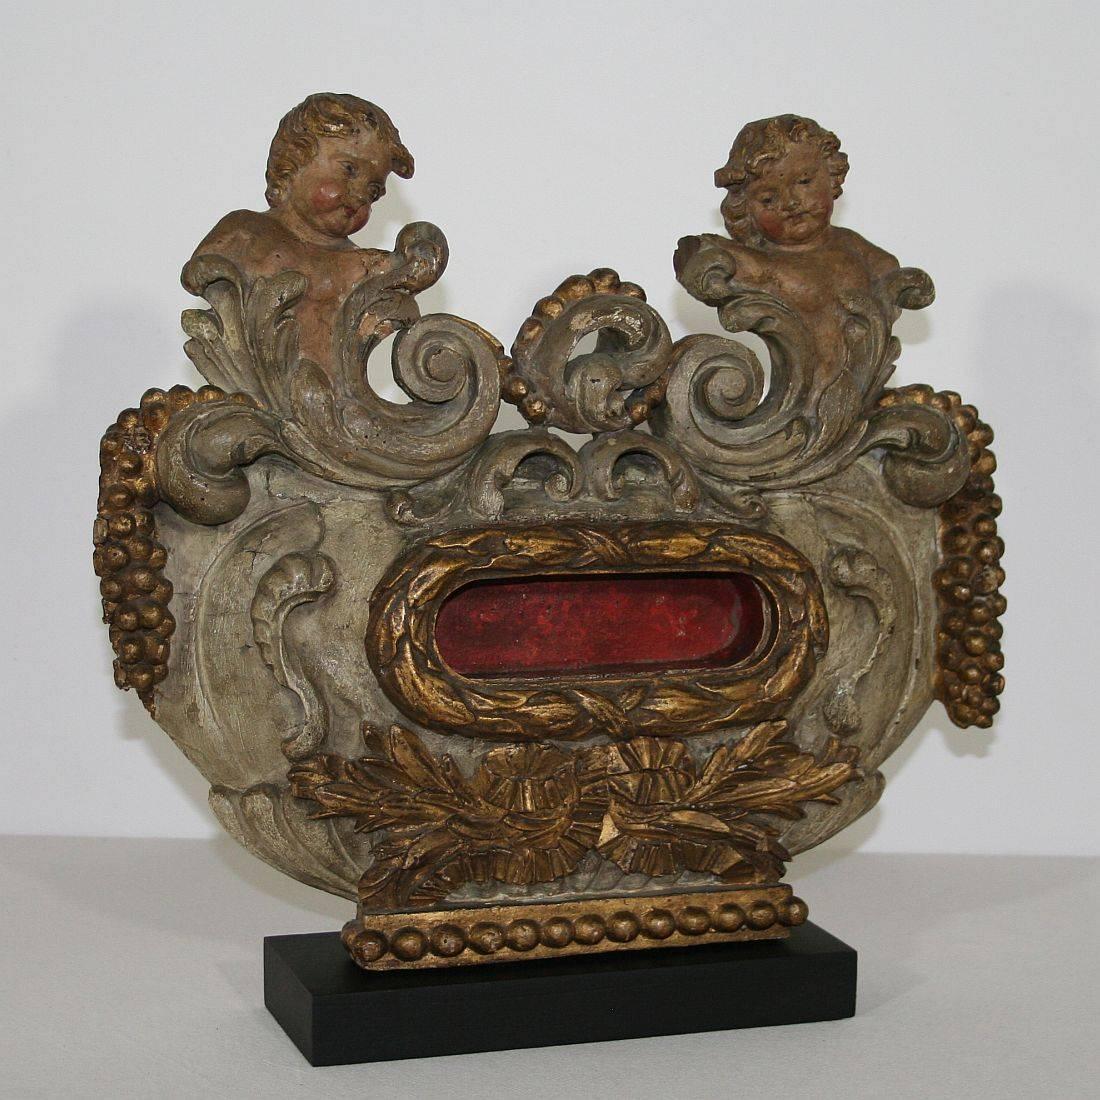 Unique reliquary with two angels and its original color
Italy, circa 1650-1700
Weathered and small losses. Without the relics.
Measurement with the wooden base.
More pictures available on request.